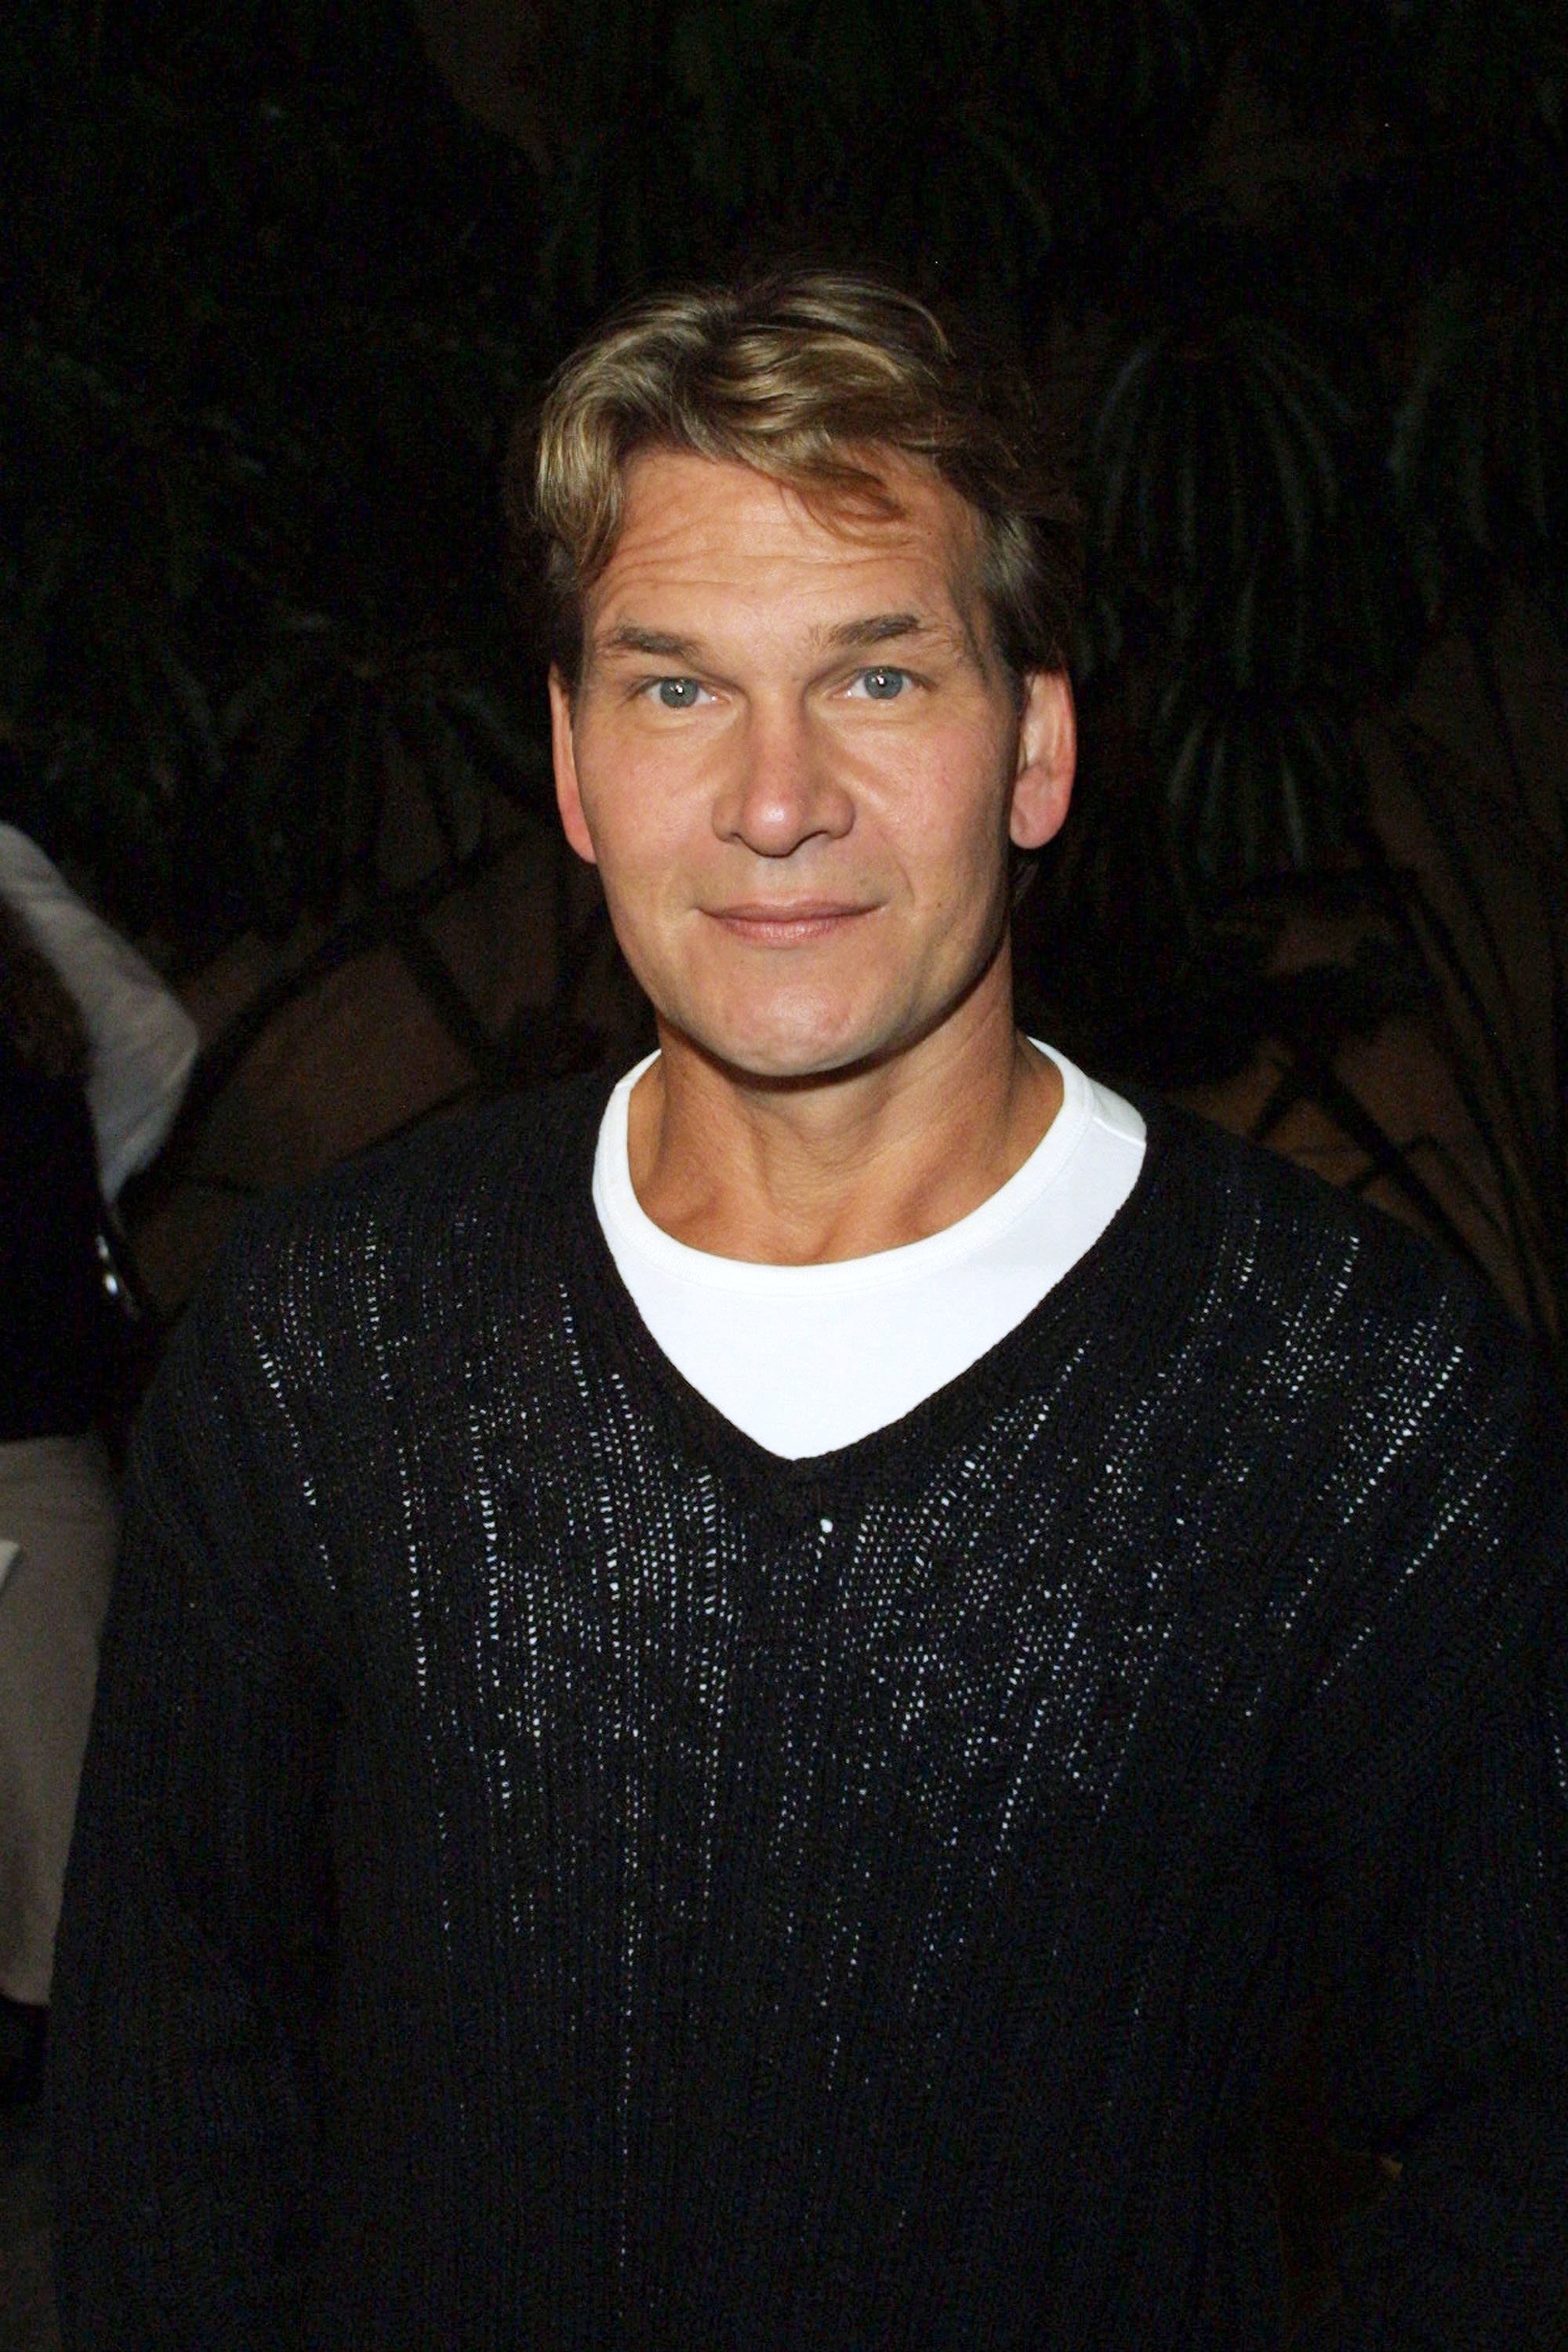 Patrick Swayze attends the premiere of "Donnie Darko" at the Egyptian Theatre on October 22, 2001, in Hollywood, California. | Source: Getty Images